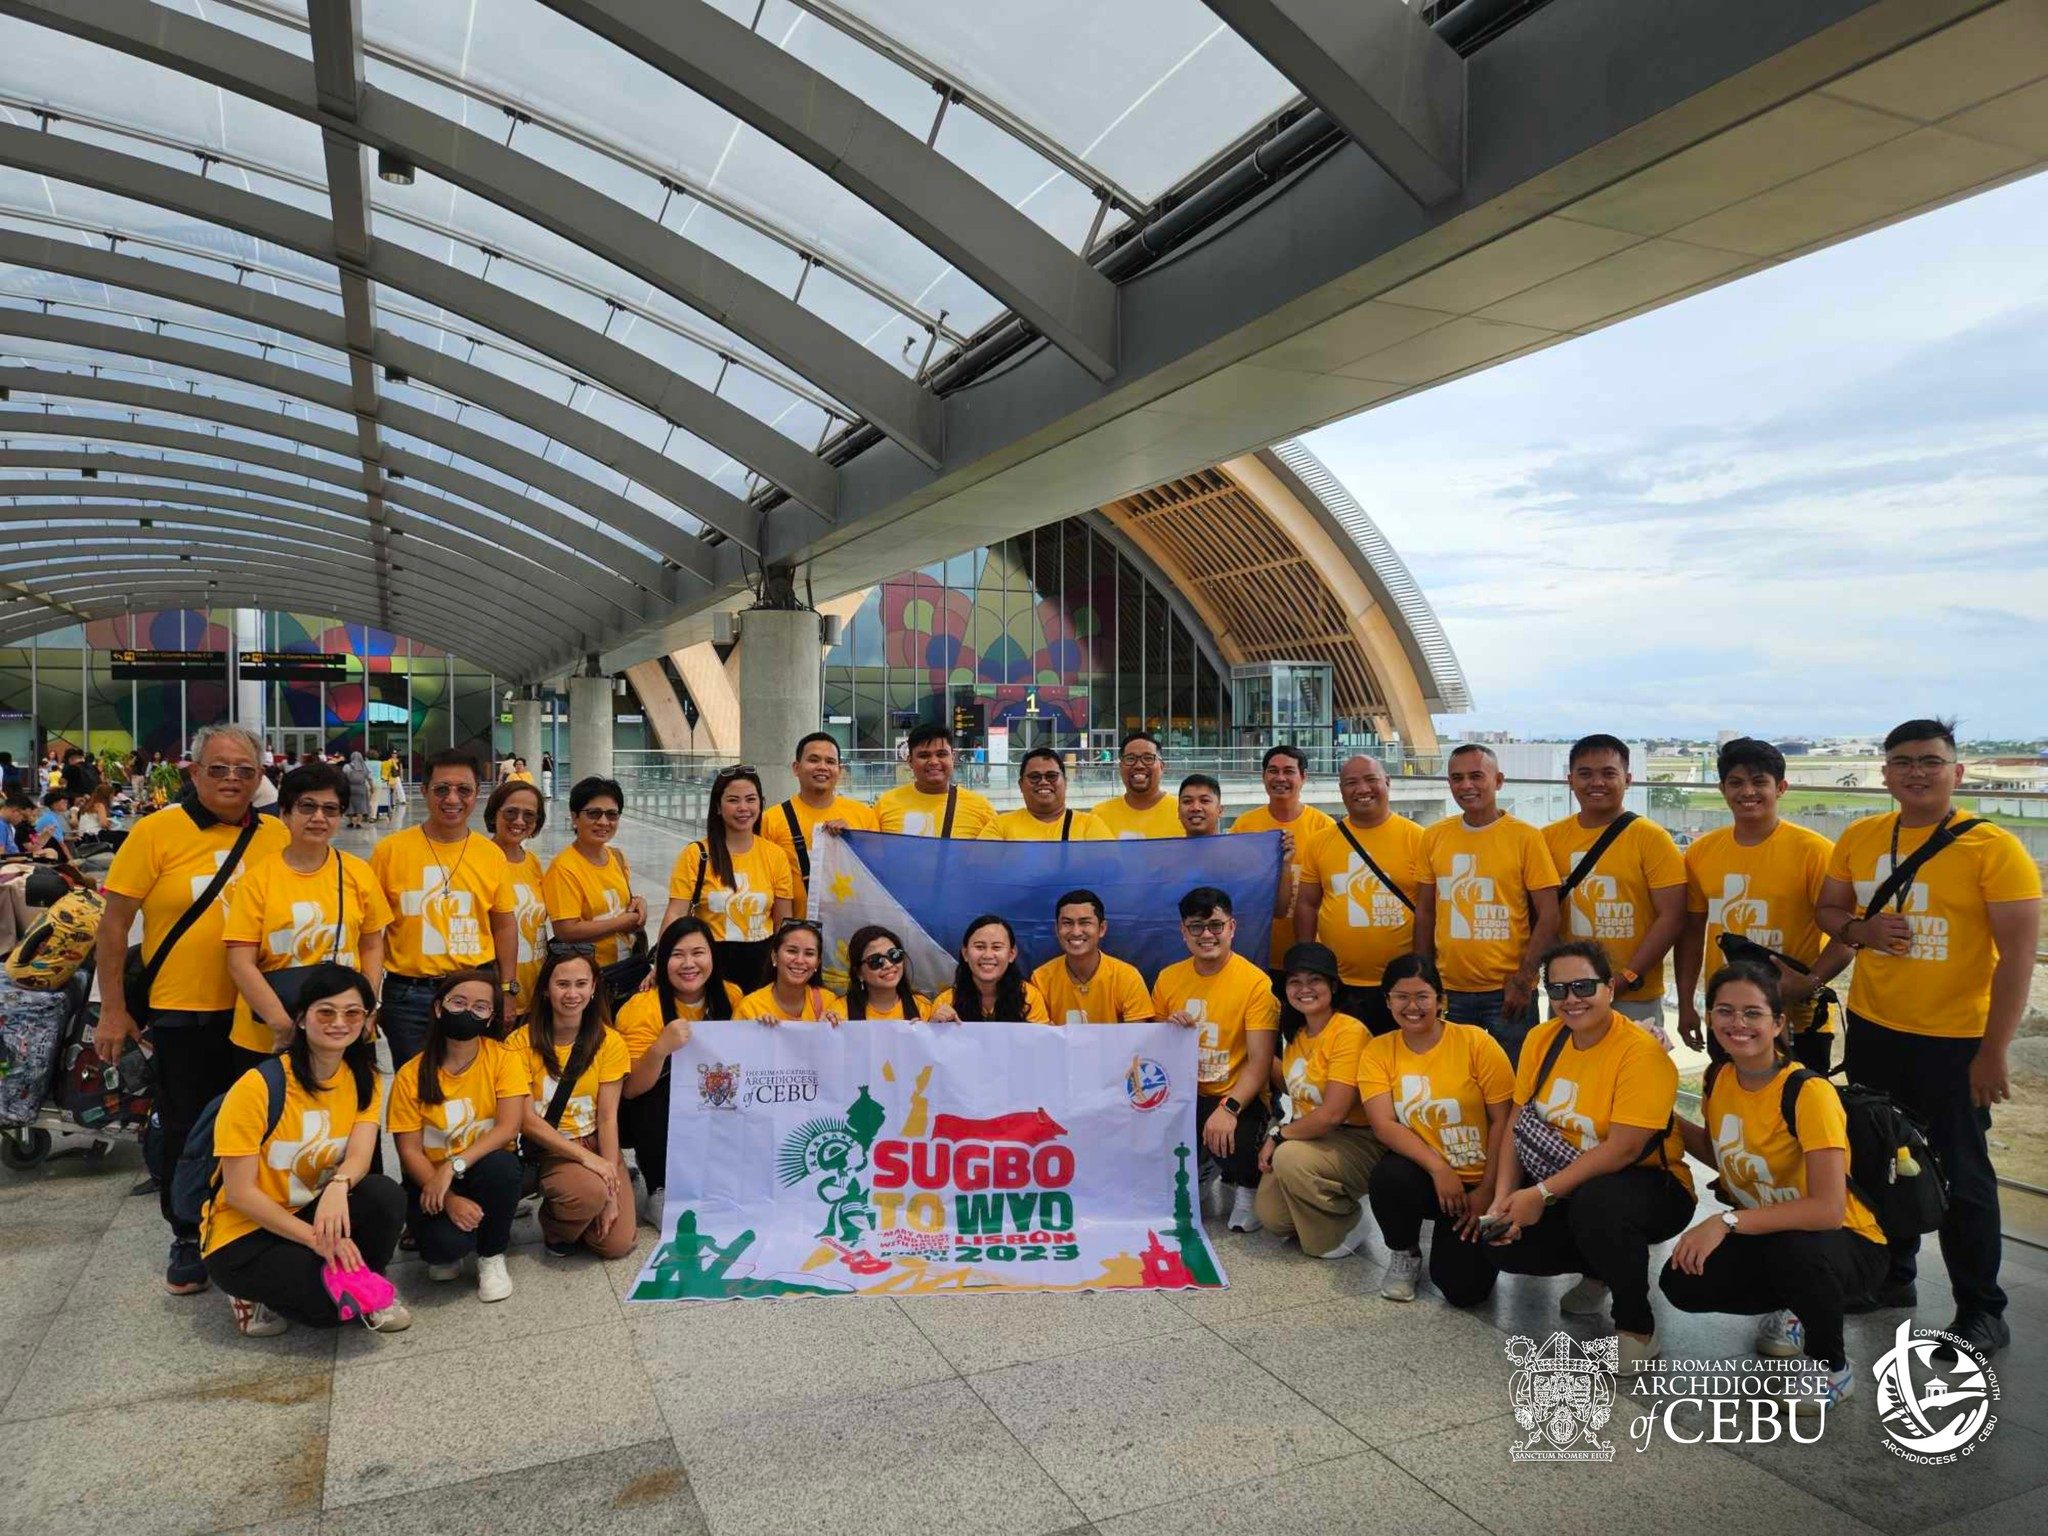 1,500 Filipinos attending 2023 World Youth Day in Portugal